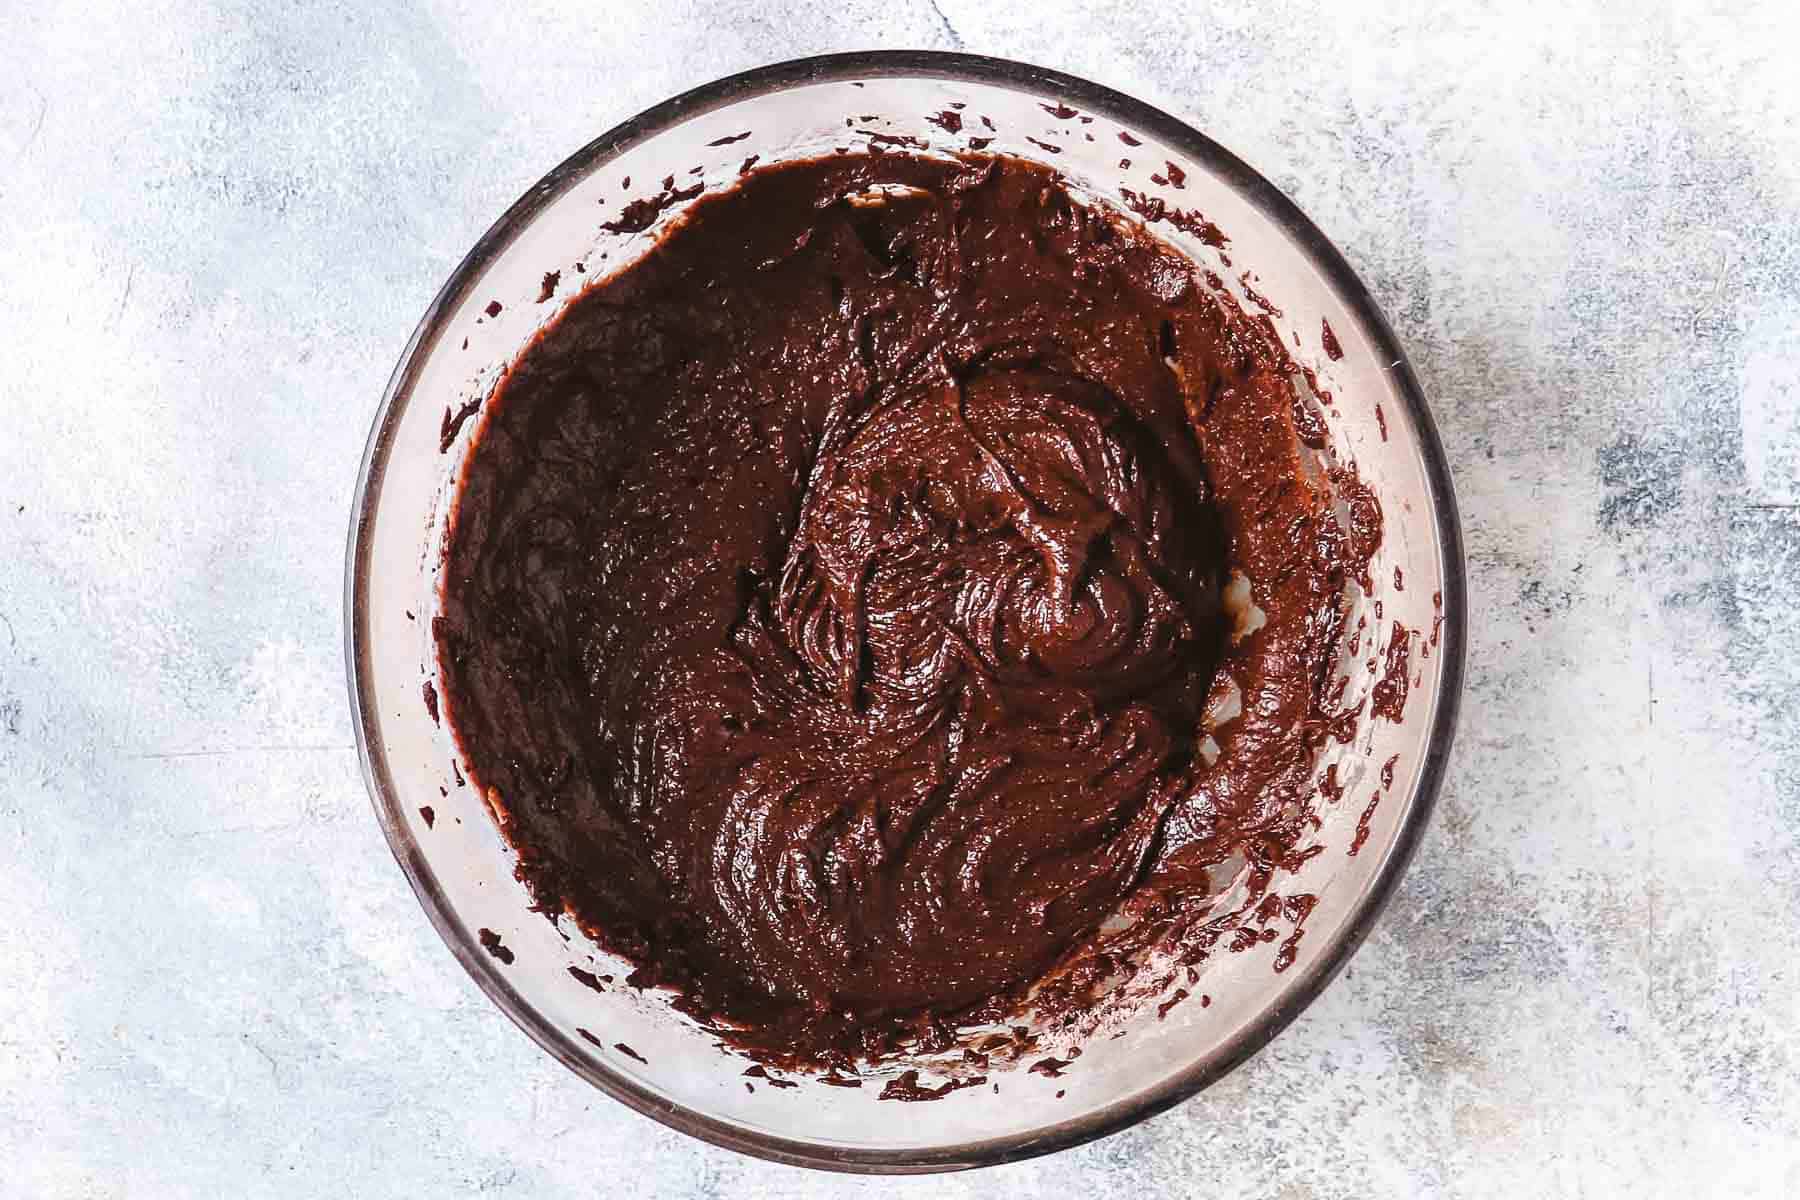 Chocolate cake batter in a bowl